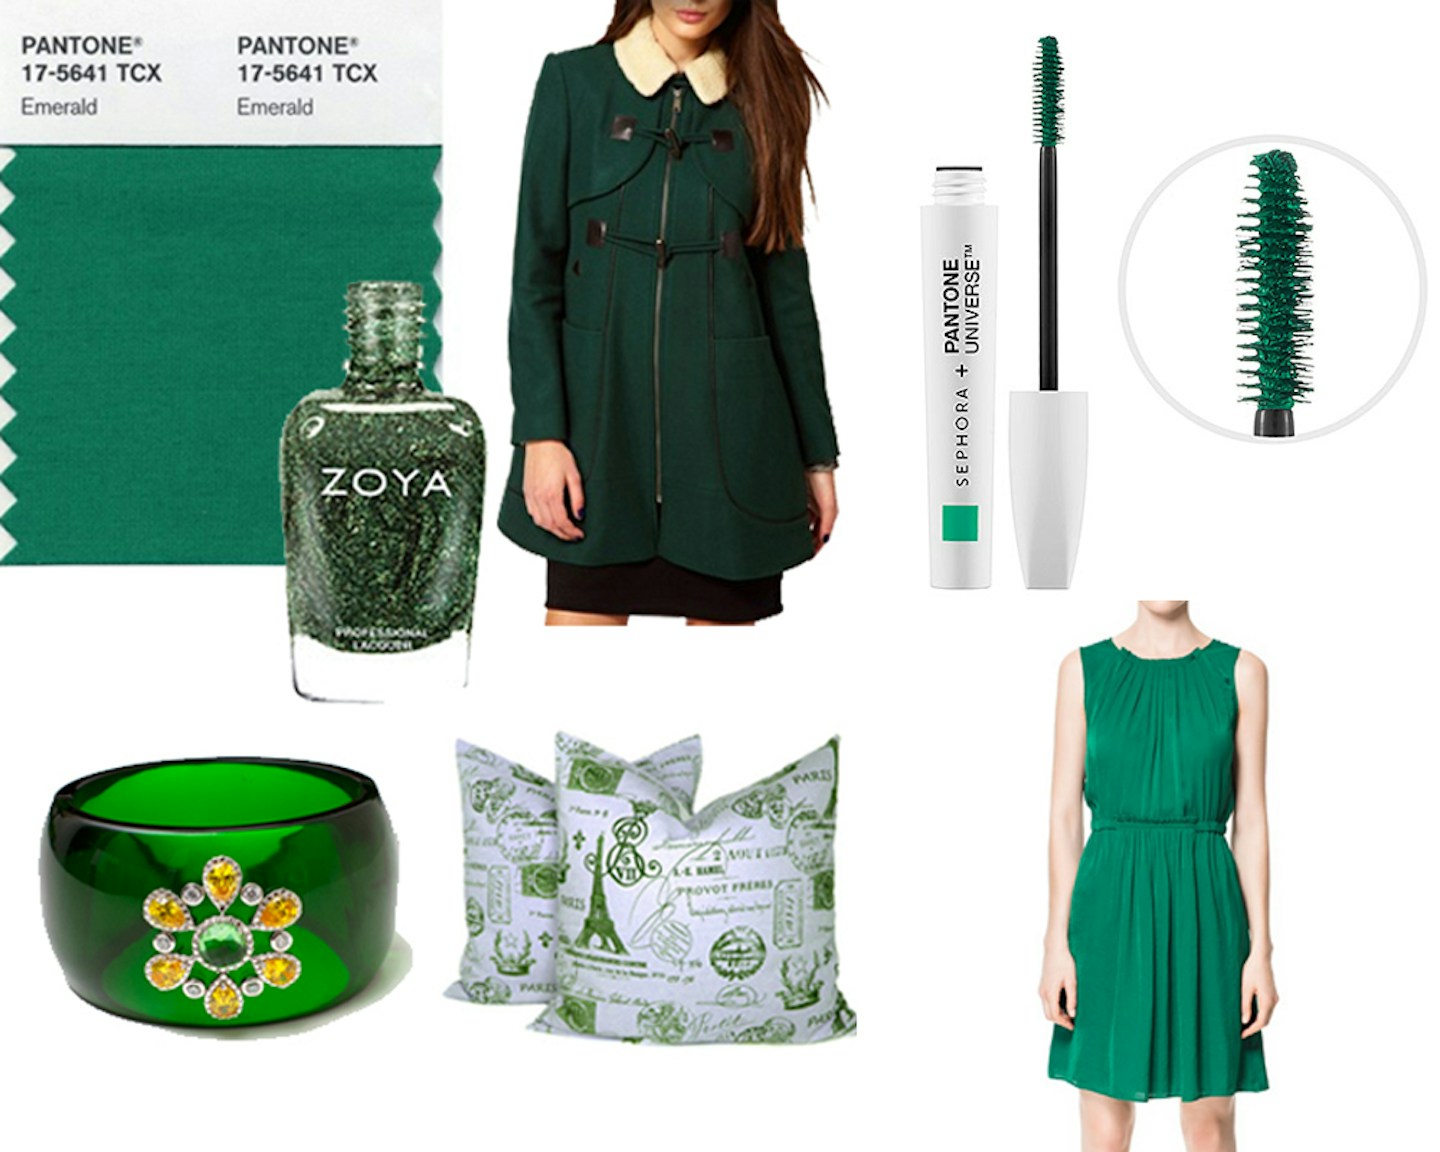 How to Wear Emerald – Pantone’s 2013 Color of the Year